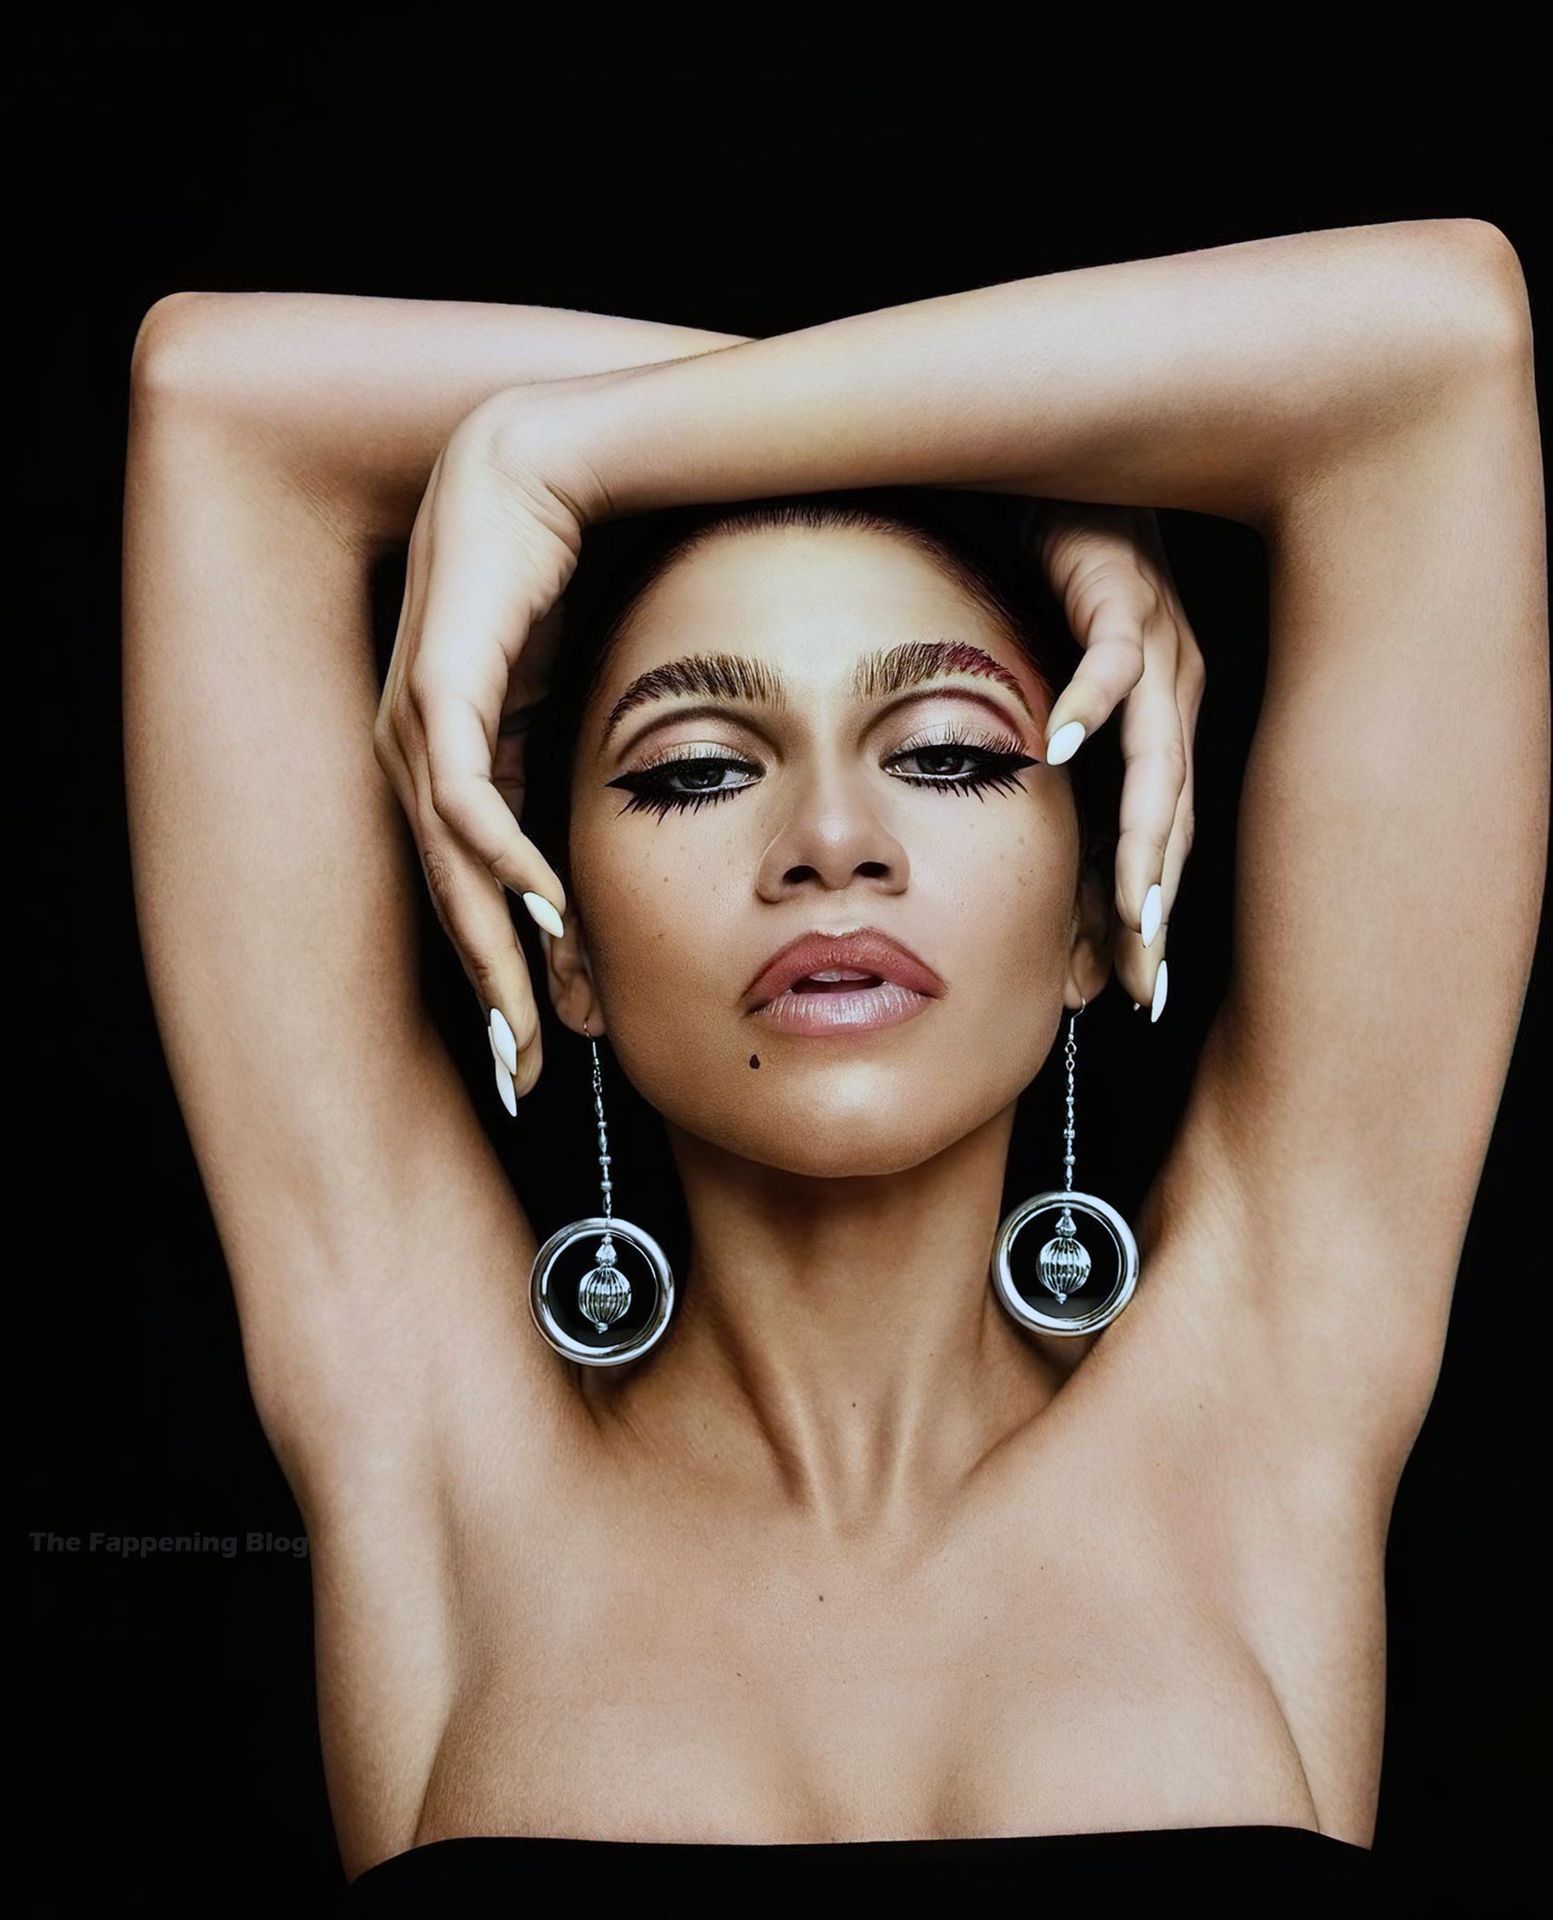 Zendaya Almost Naked for Essence’s Campaign.